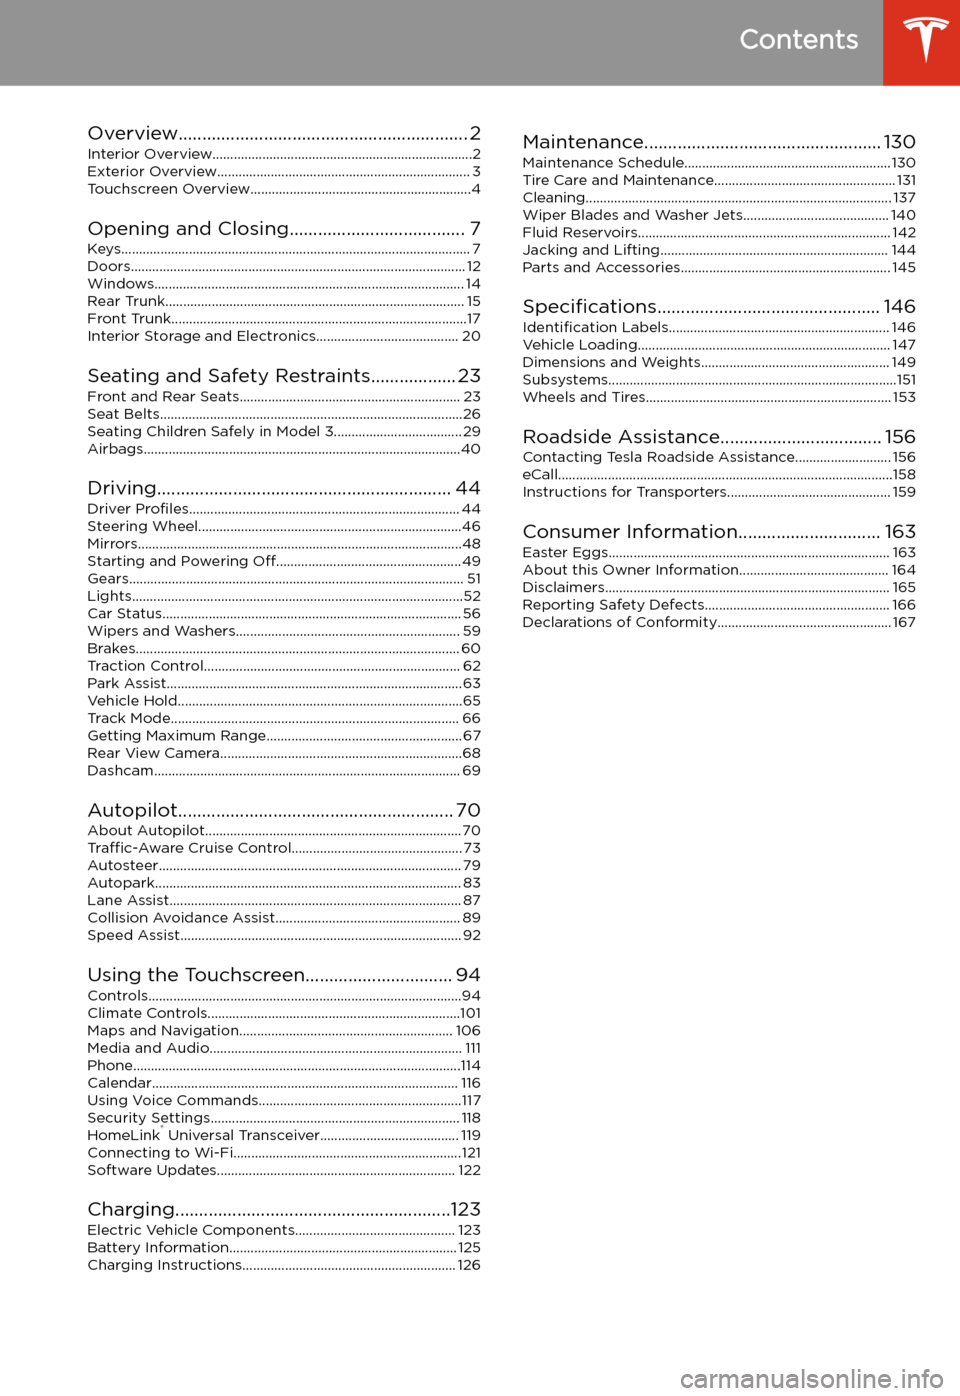 TESLA MODEL 3 2019  Owners Manual (Europe) Contents
Overview............................................................. 2
Interior Overview.........................................................................2
Exterior Overview..........